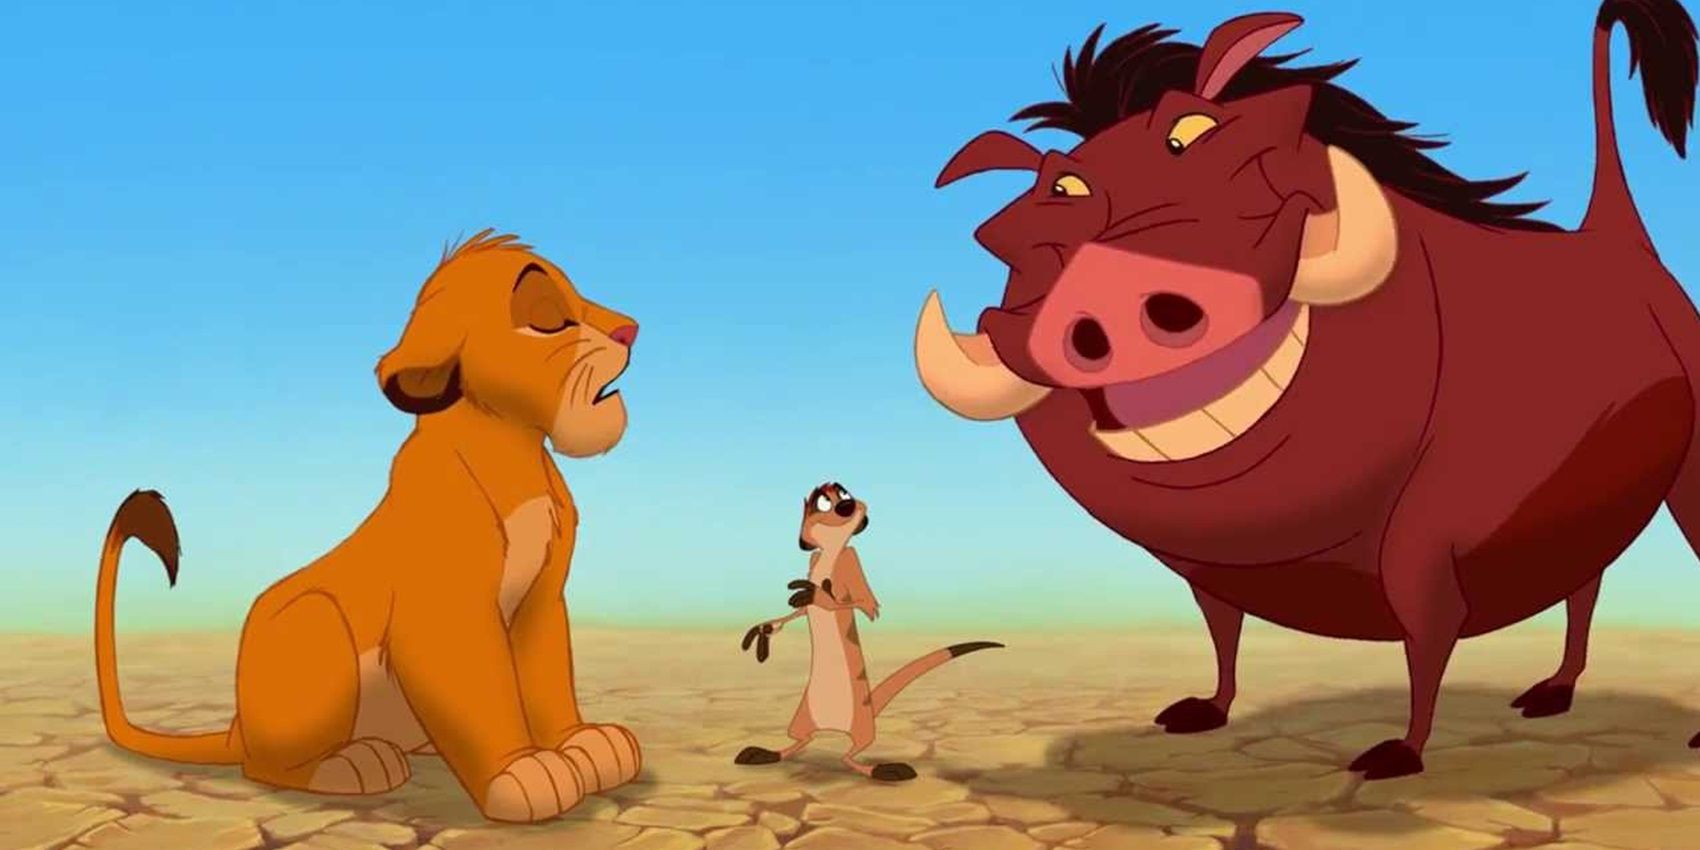 Simba talking to Timon and Pumbaa in The Lion King